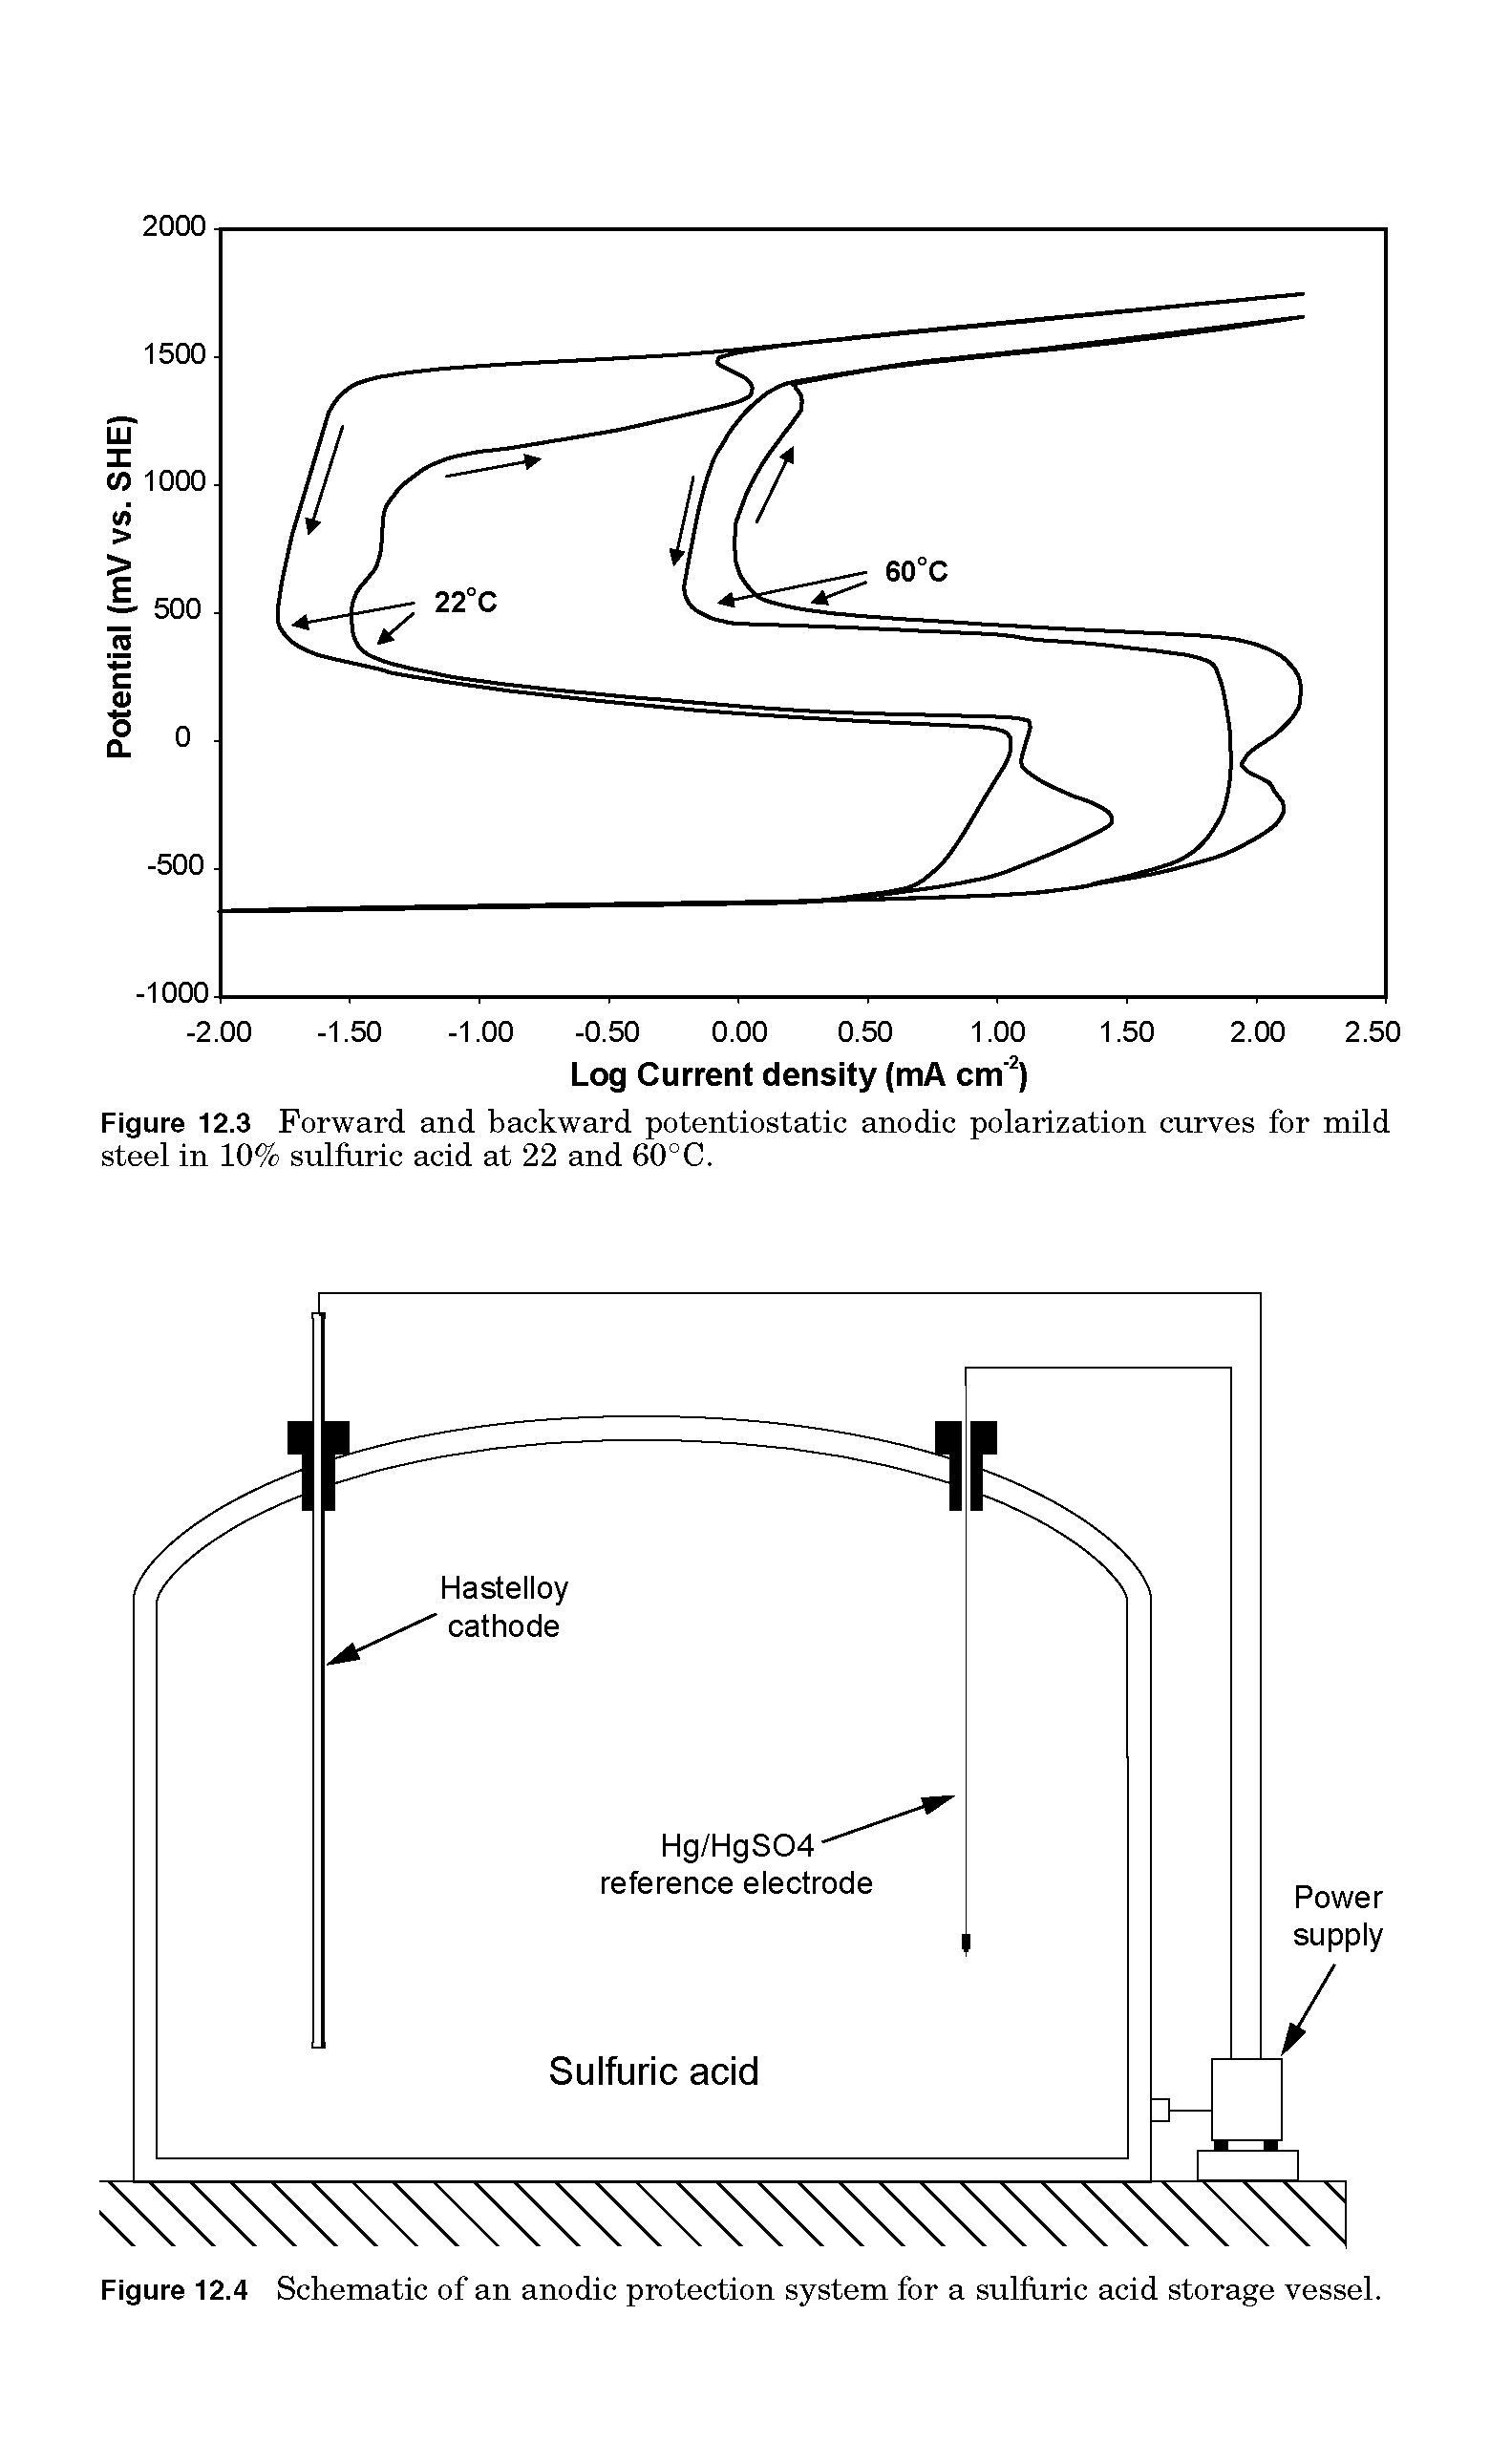 Figure 12.3 Forward and backward potentiostatic anodic polarization curves for mild steel in 10% sulfuric acid at 22 and 60°C.